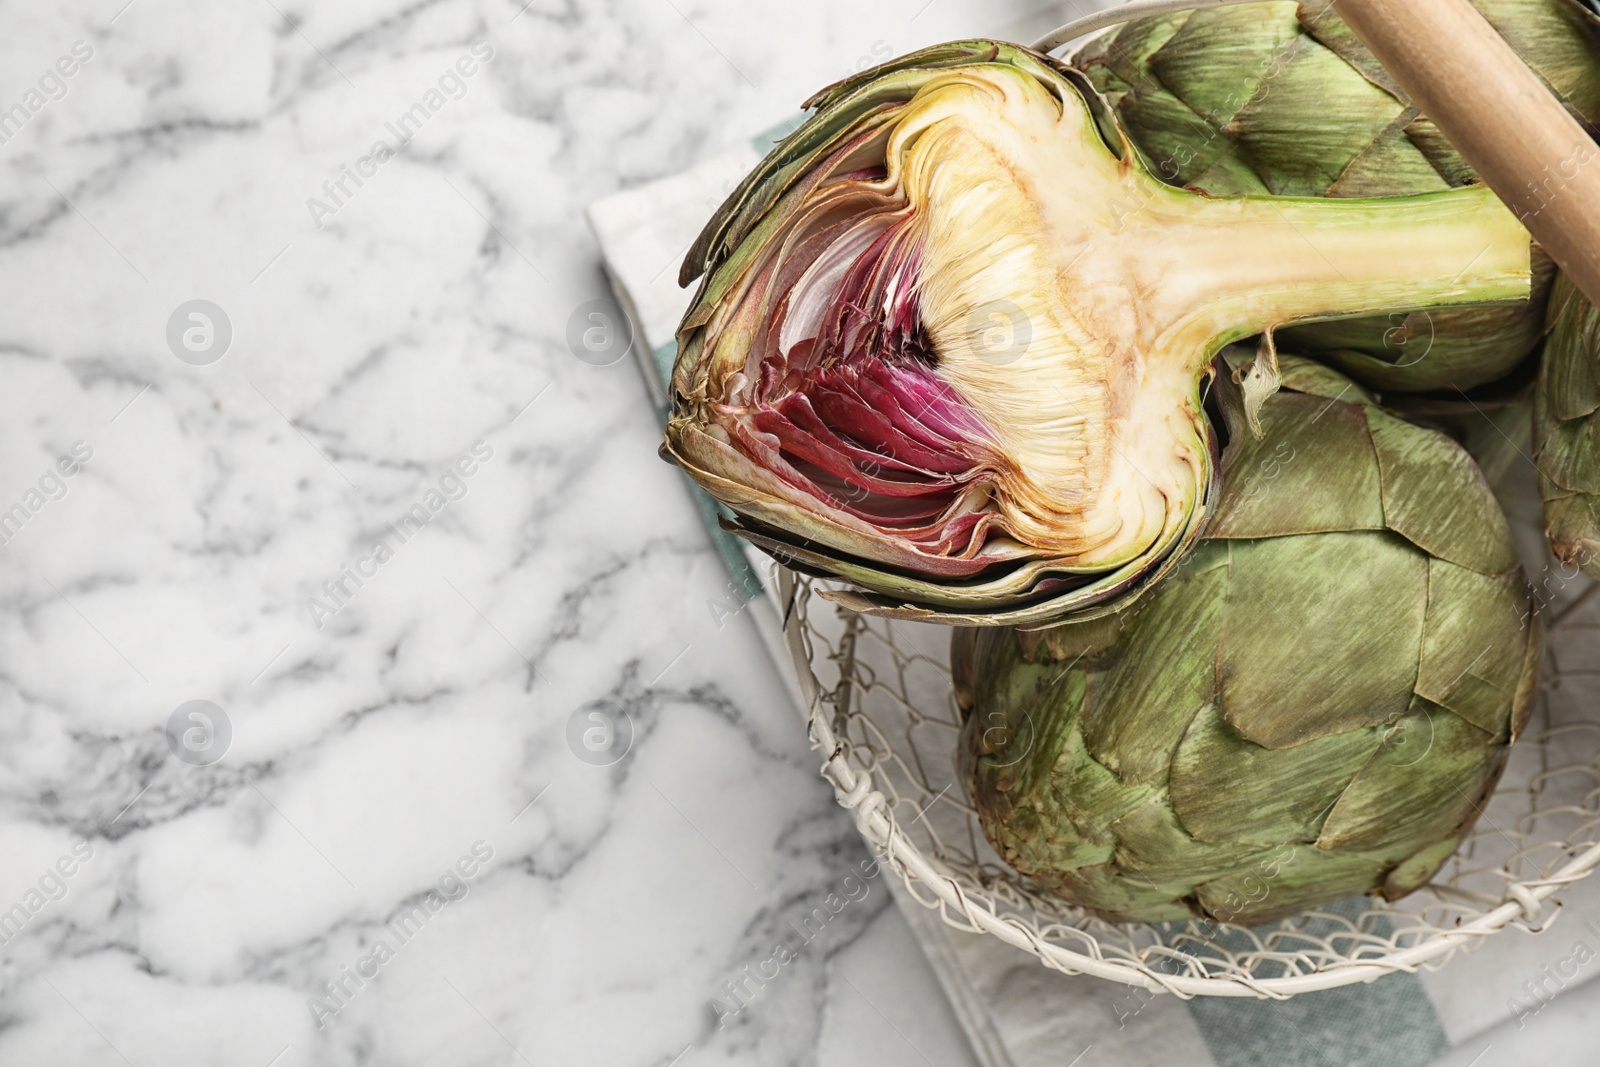 Photo of Cut and whole fresh raw artichokes on white marble table, top view. Space for text